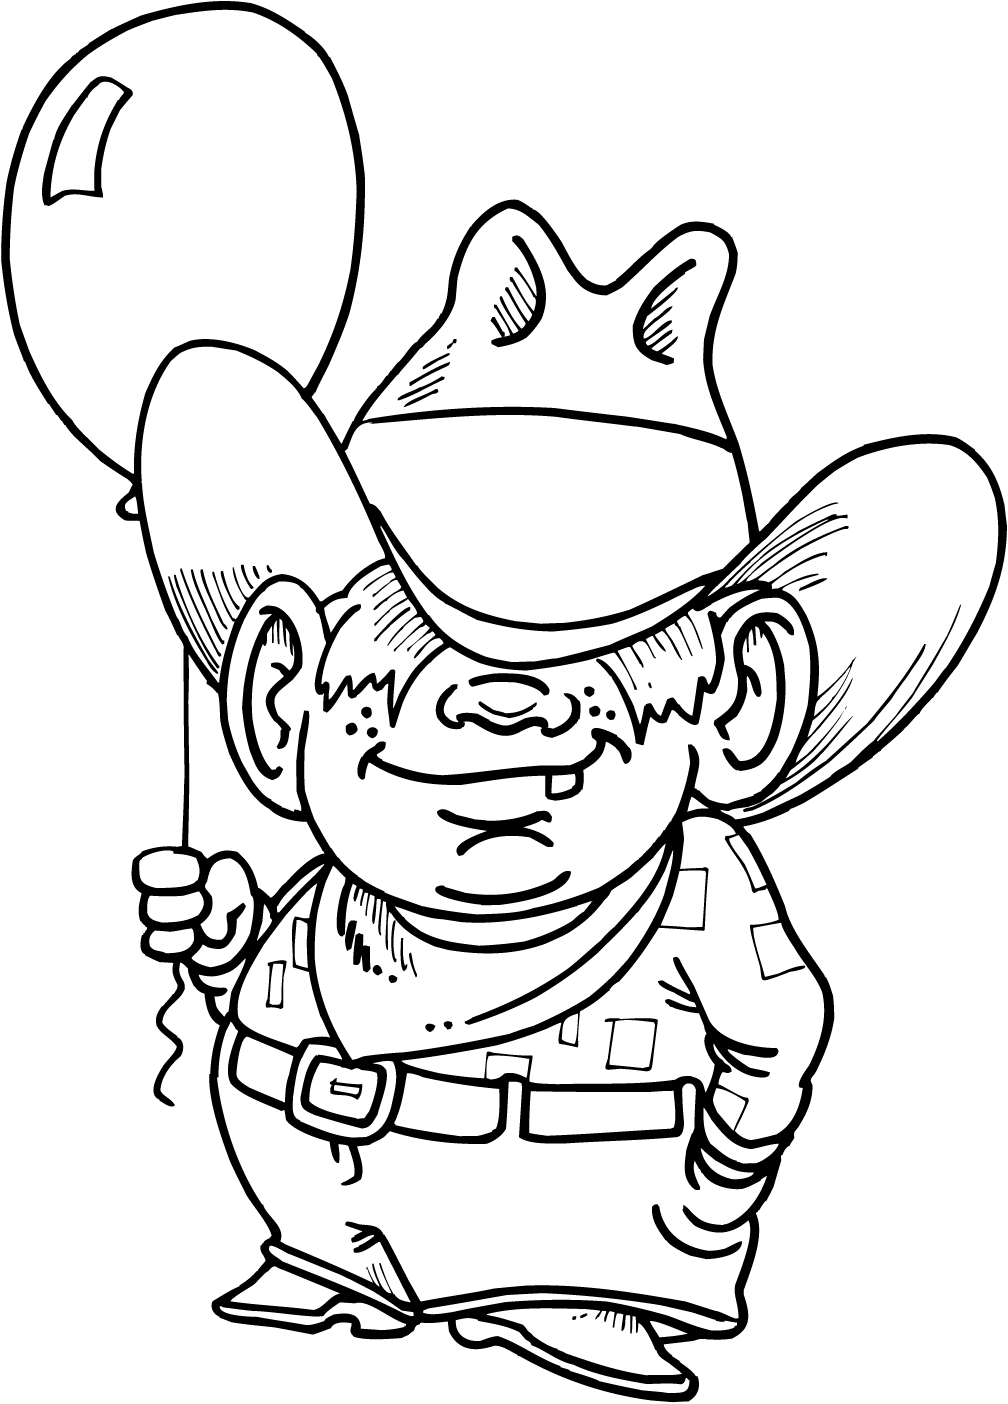 coloring page of cowboy kid holding a balloon - Coloring Point